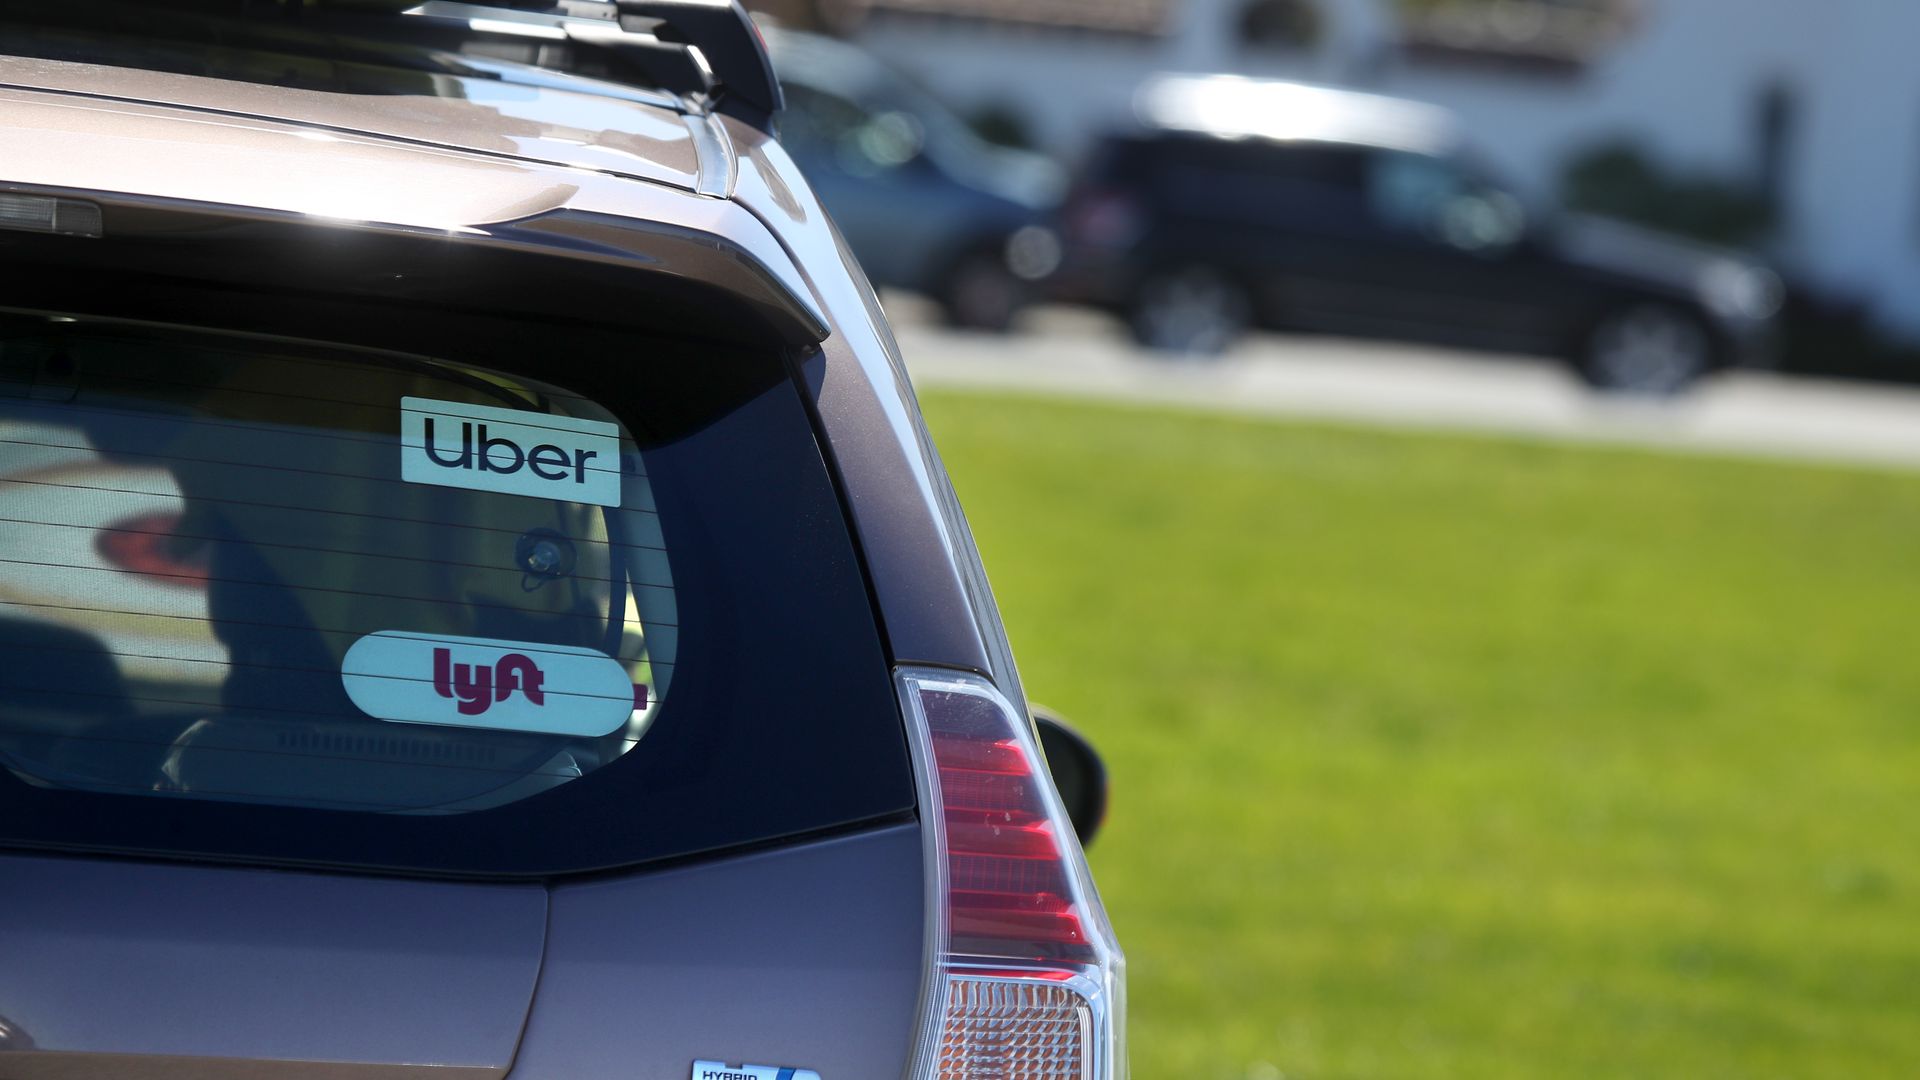 back of a car with the Uber and Lyft logos on the window